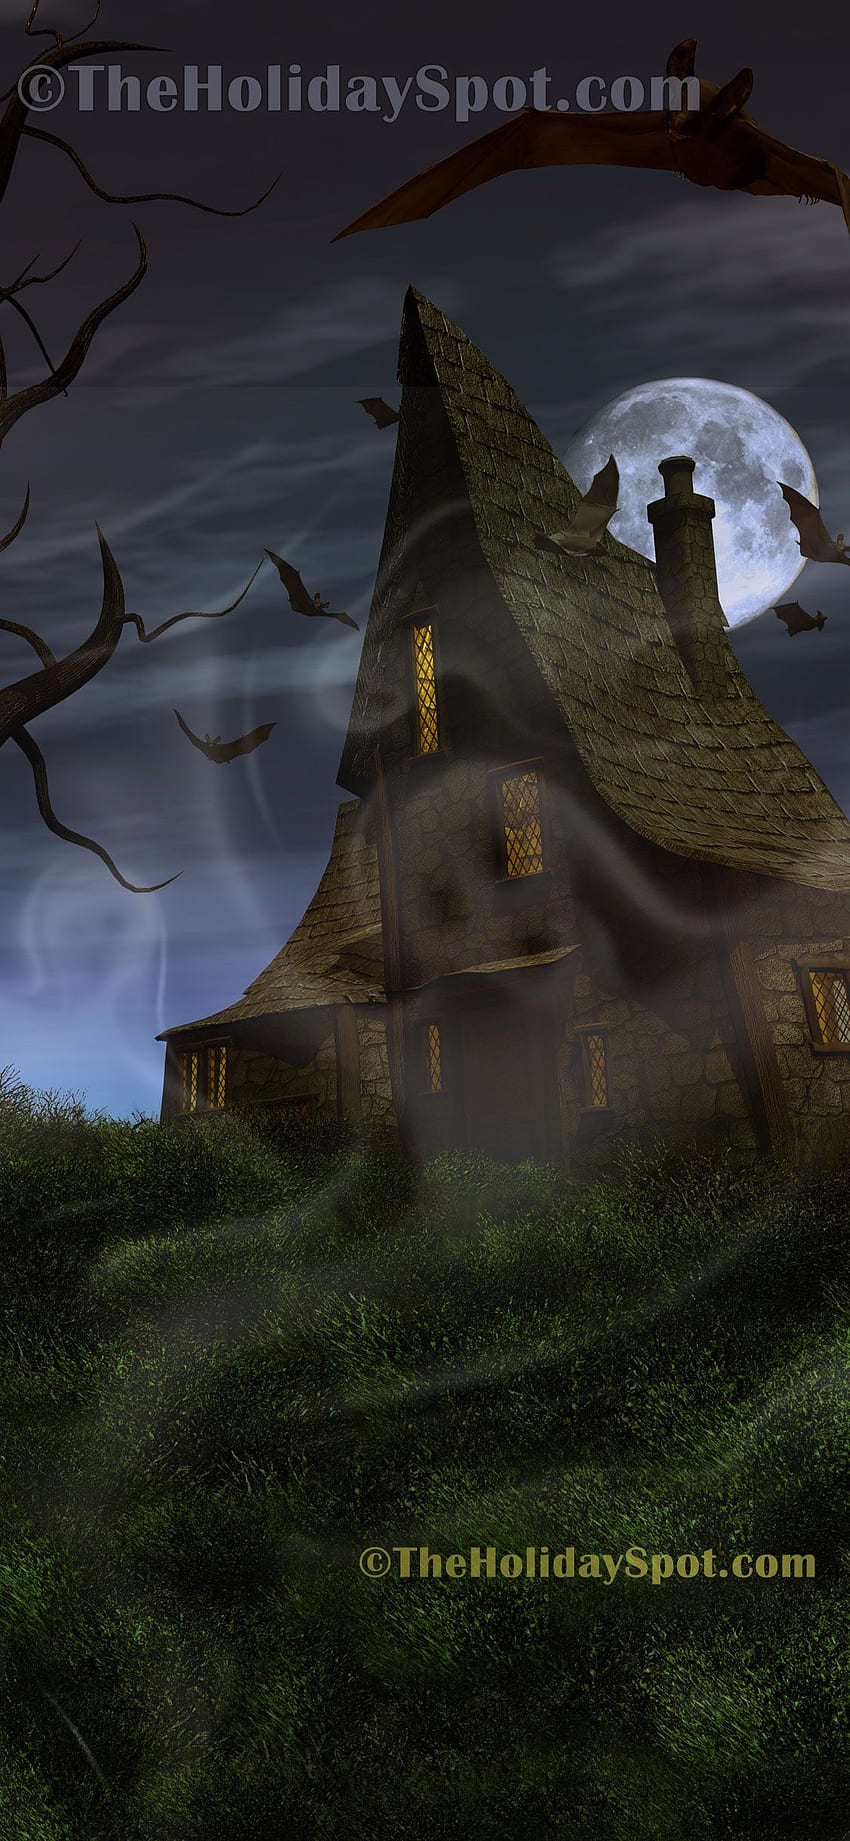 Halloween for iPhone, Haunted House iPhone HD phone wallpaper